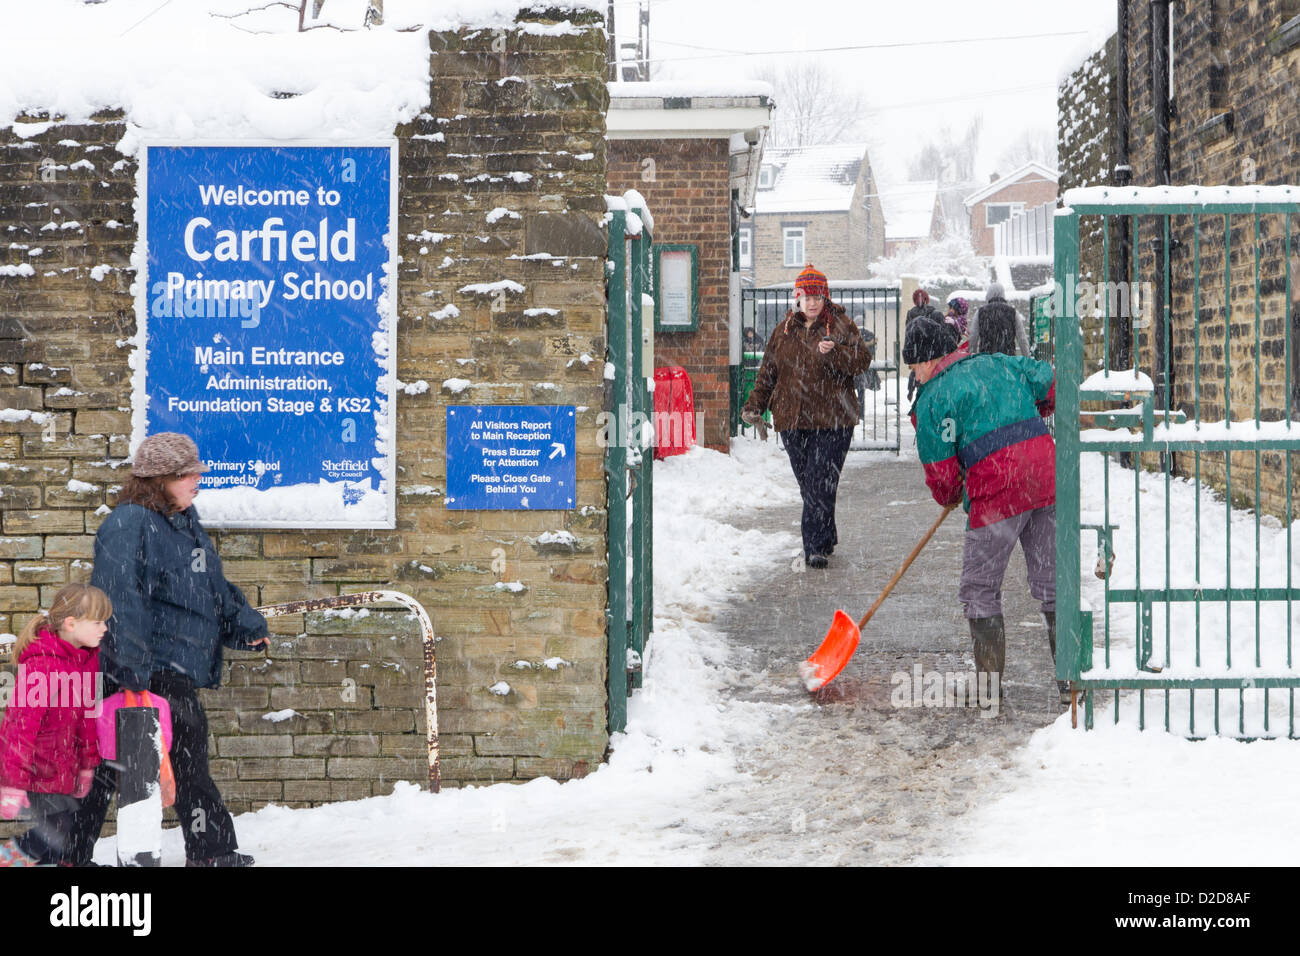 Sheffield, UK. 21st January 2013. Parents take their children to school. The cold snap in the UK continues but schools remain open in Sheffield despite heavy overnight snow. Stock Photo